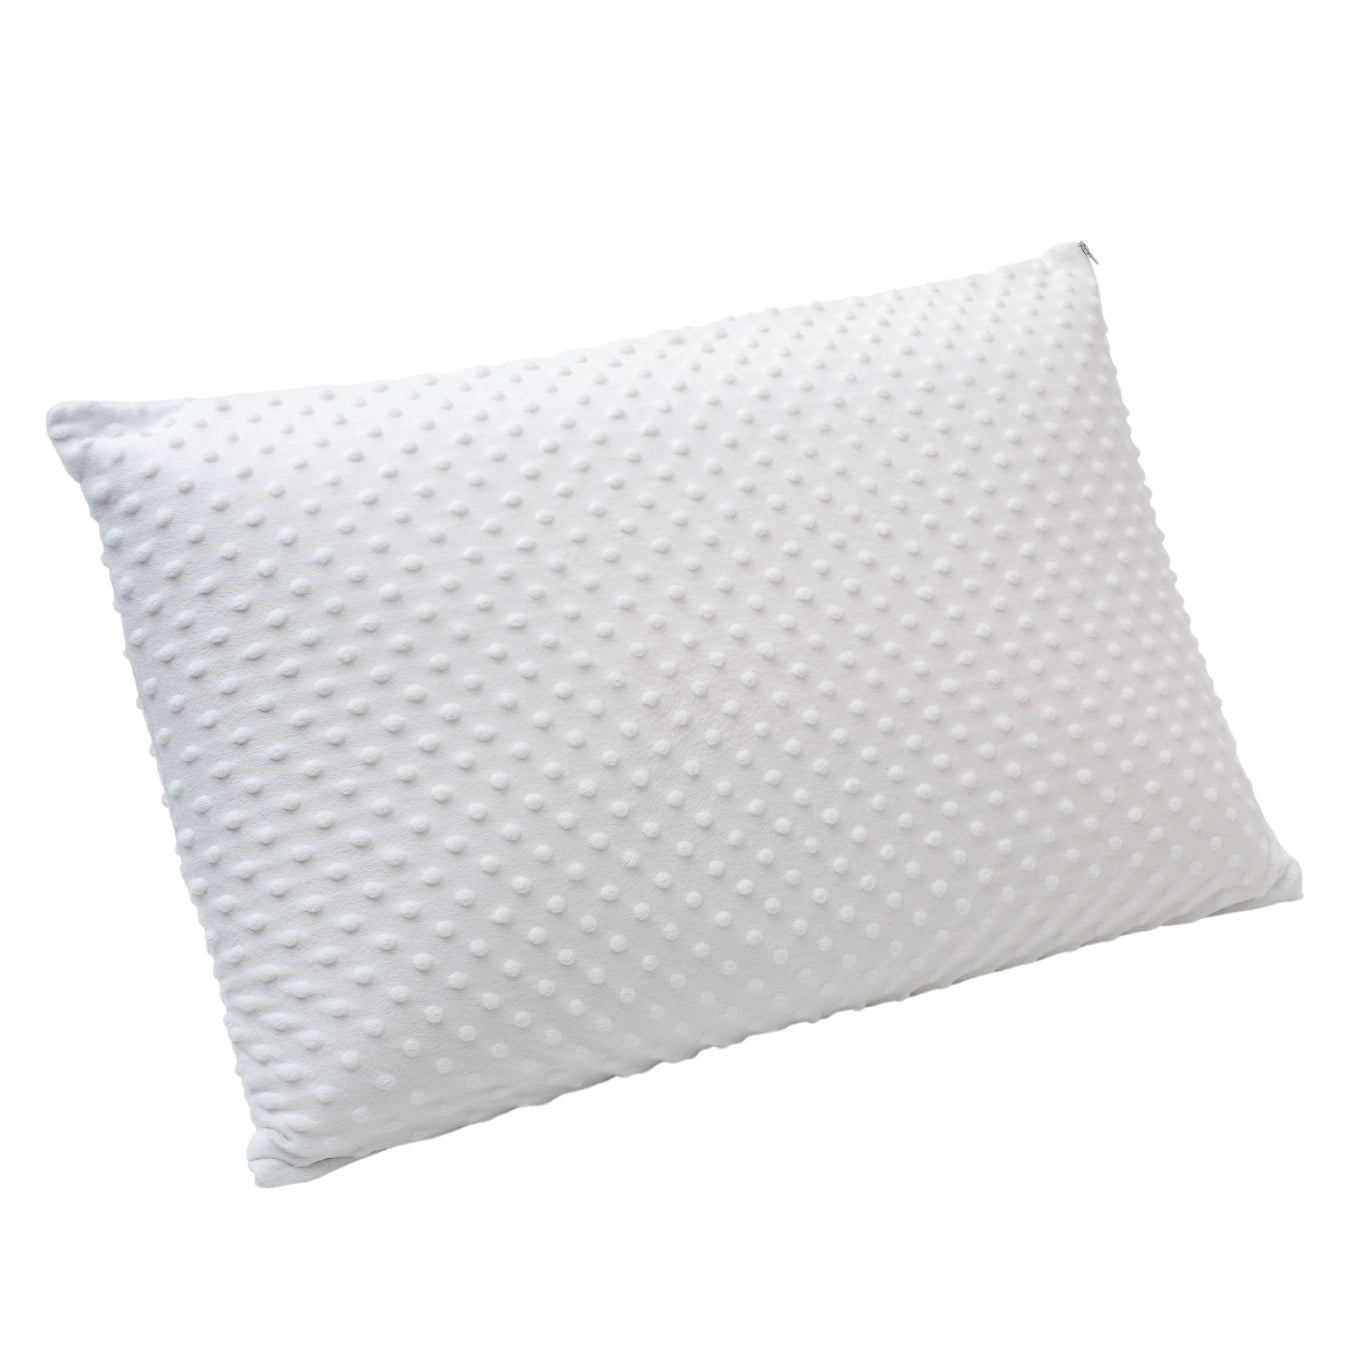 Hypnos Front Sleeper Latex Pillow